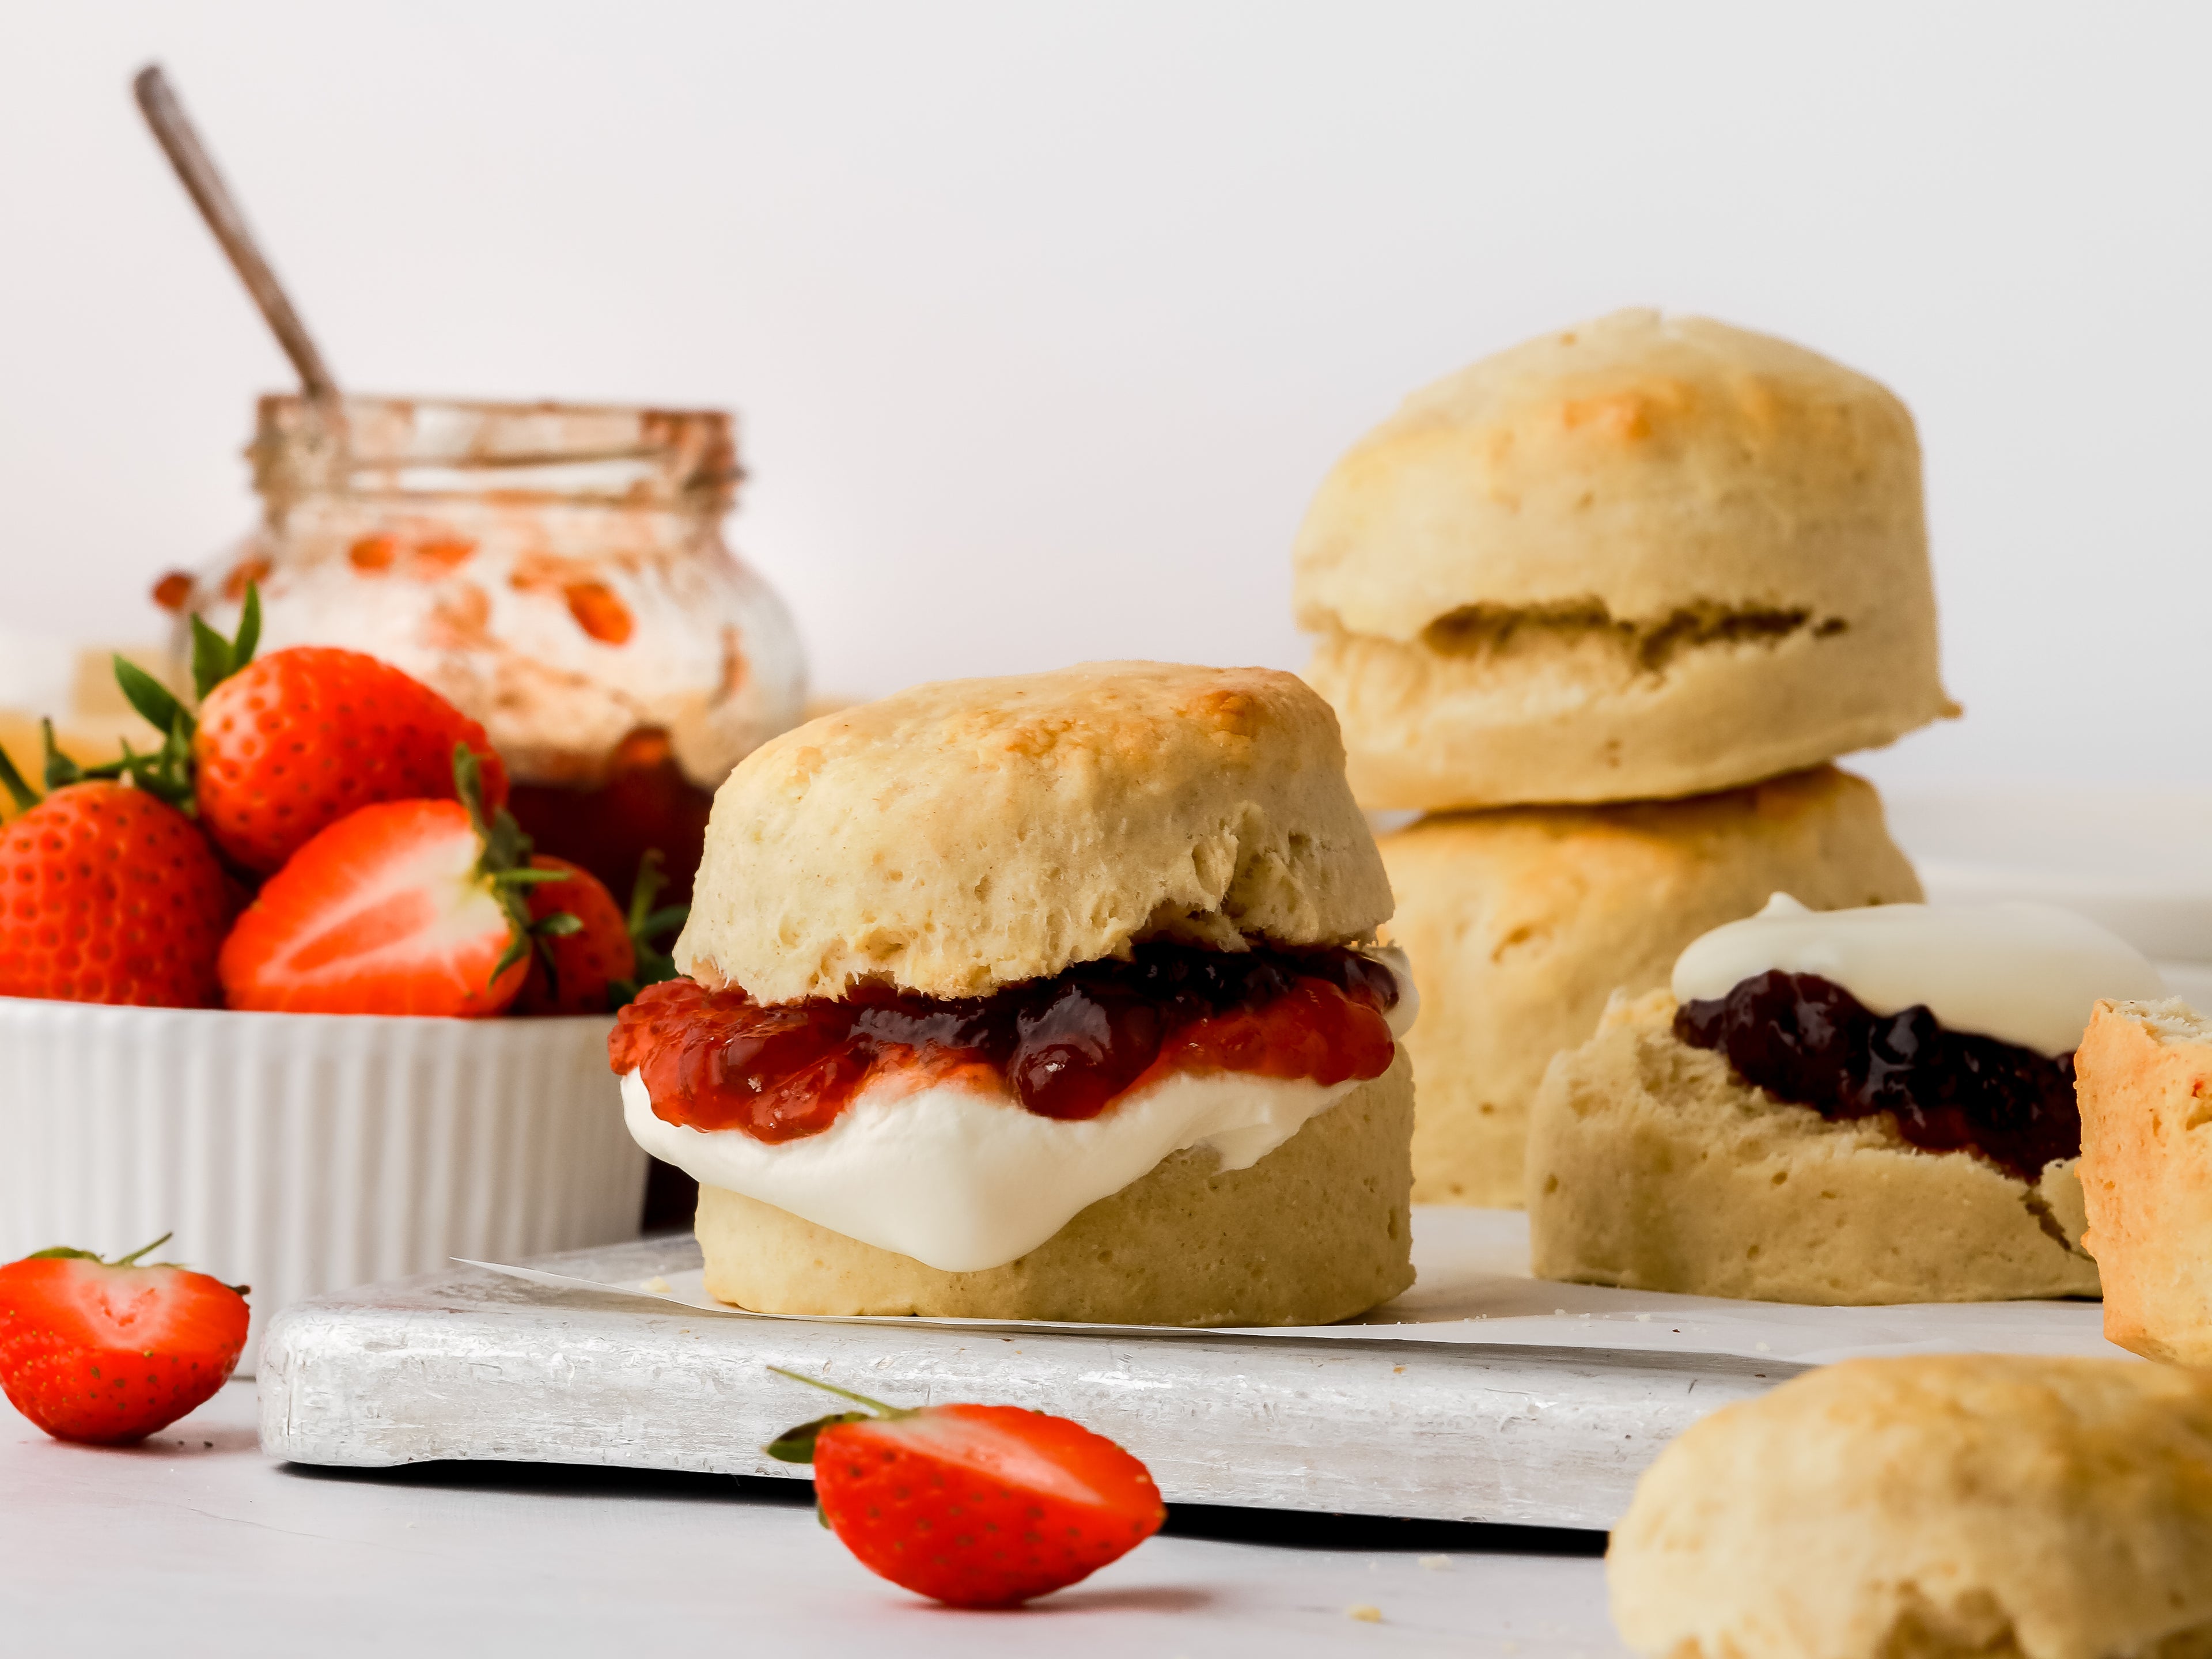 Homemade scone filled with a dollop of jam and cream with a pile of scones